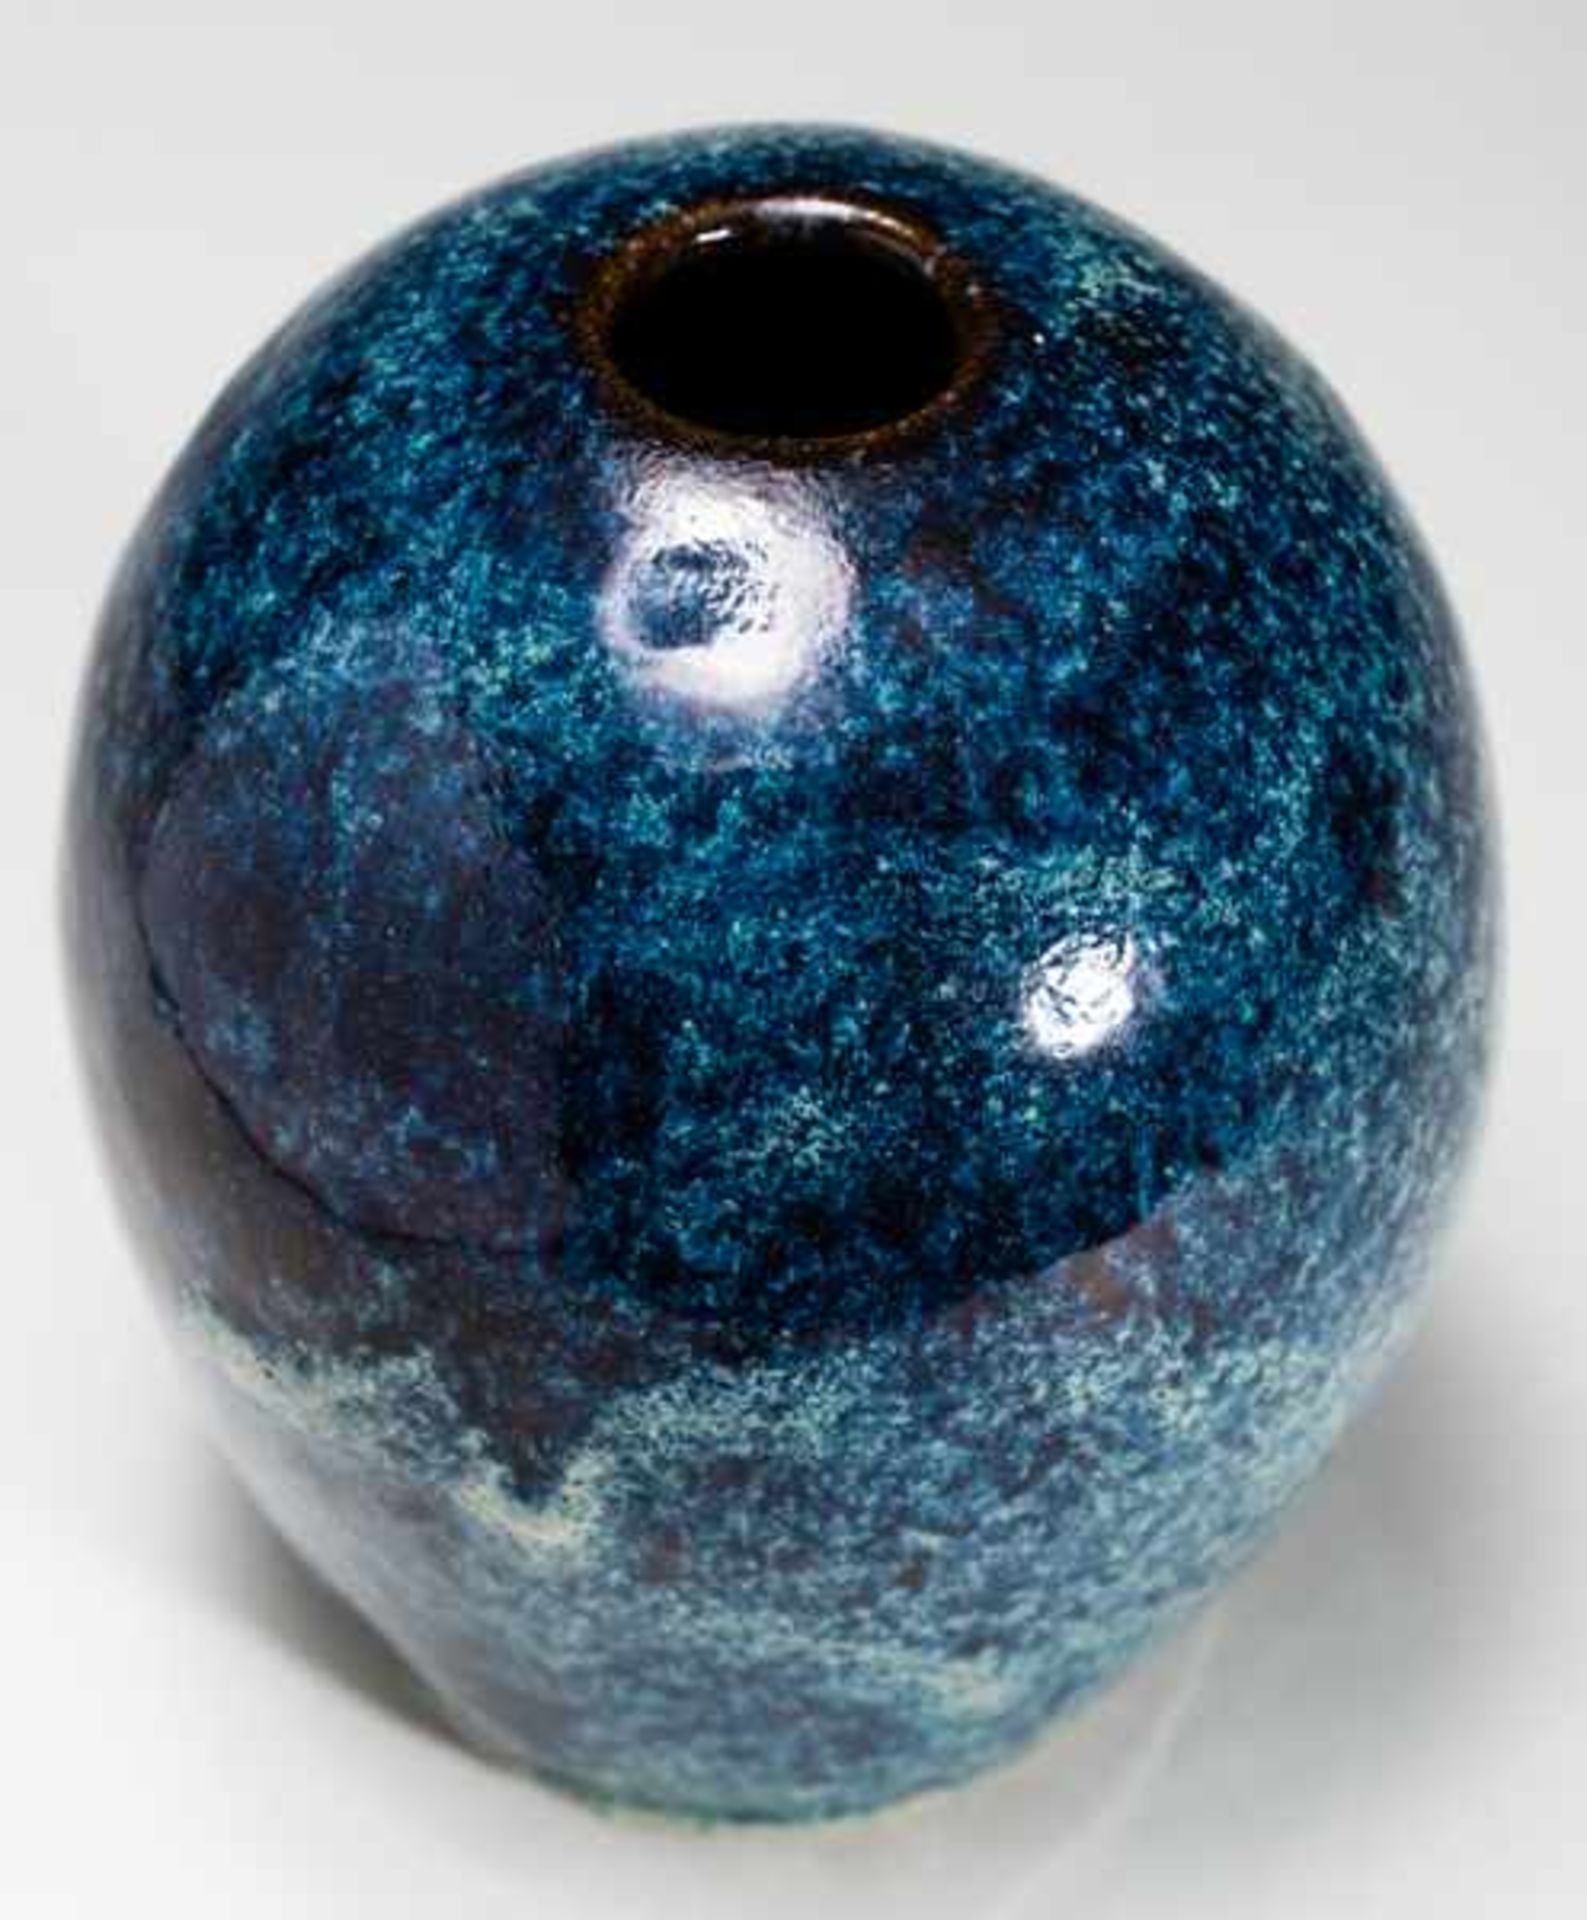 OVAL VASE WITH SPECKLED GLAZE Glazed ceramic. China, The oval vase has no neck and the opening is - Image 3 of 5